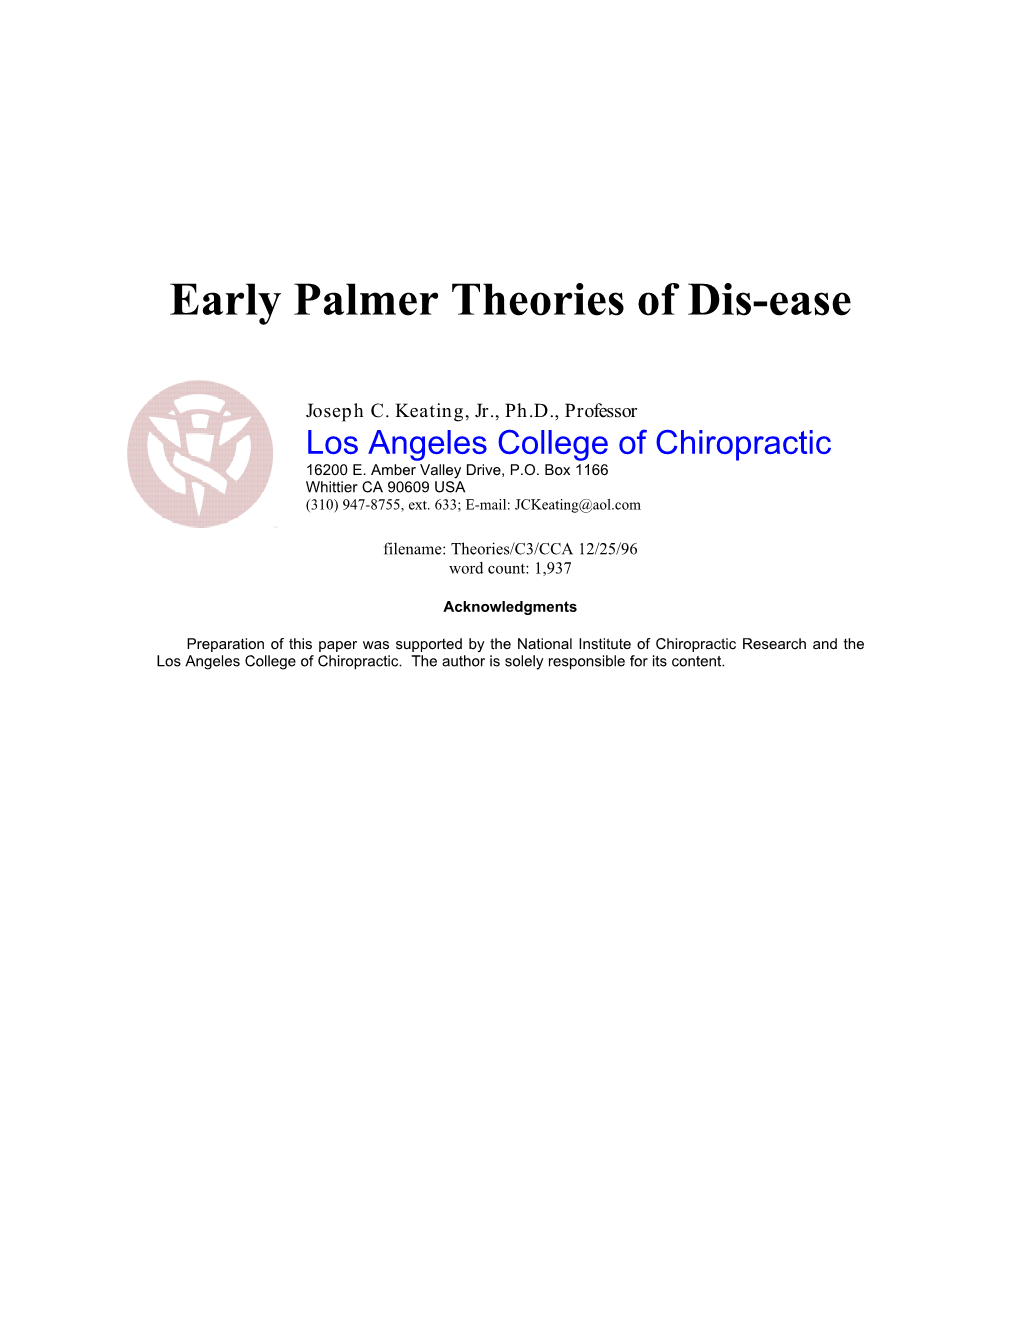 Early Palmer Theories of Dis-Ease